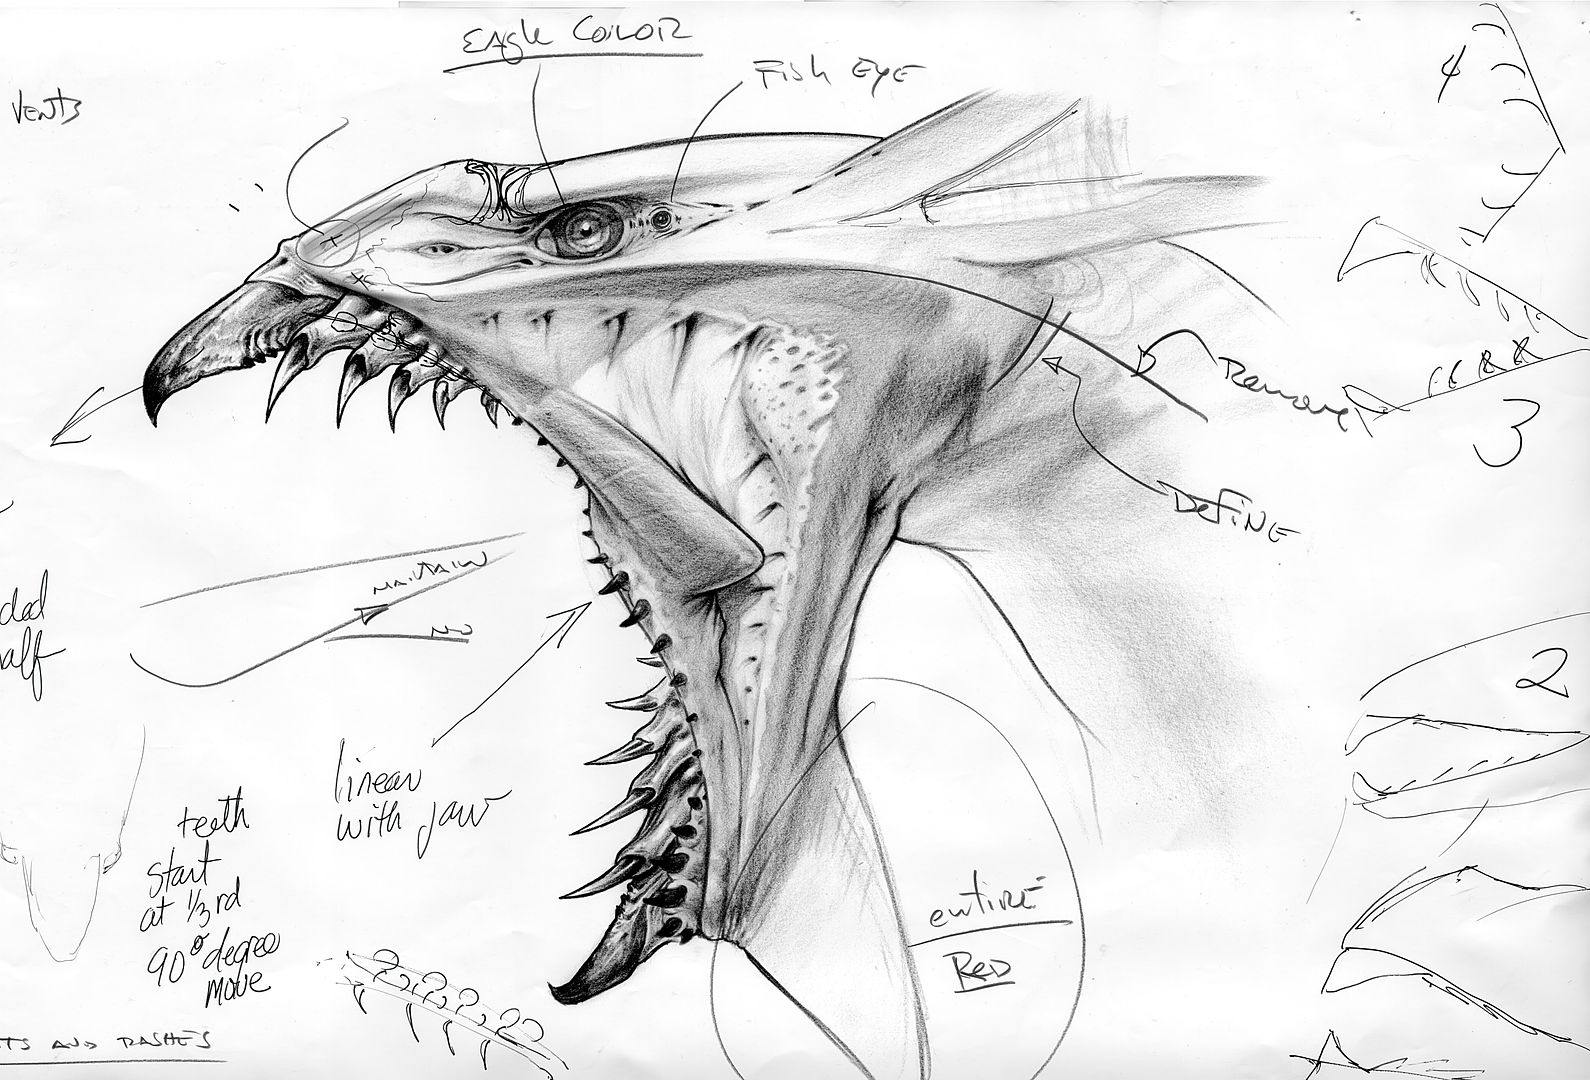 Early concept drawing of the Banshee bird, meant to employ biomechanical form and function.